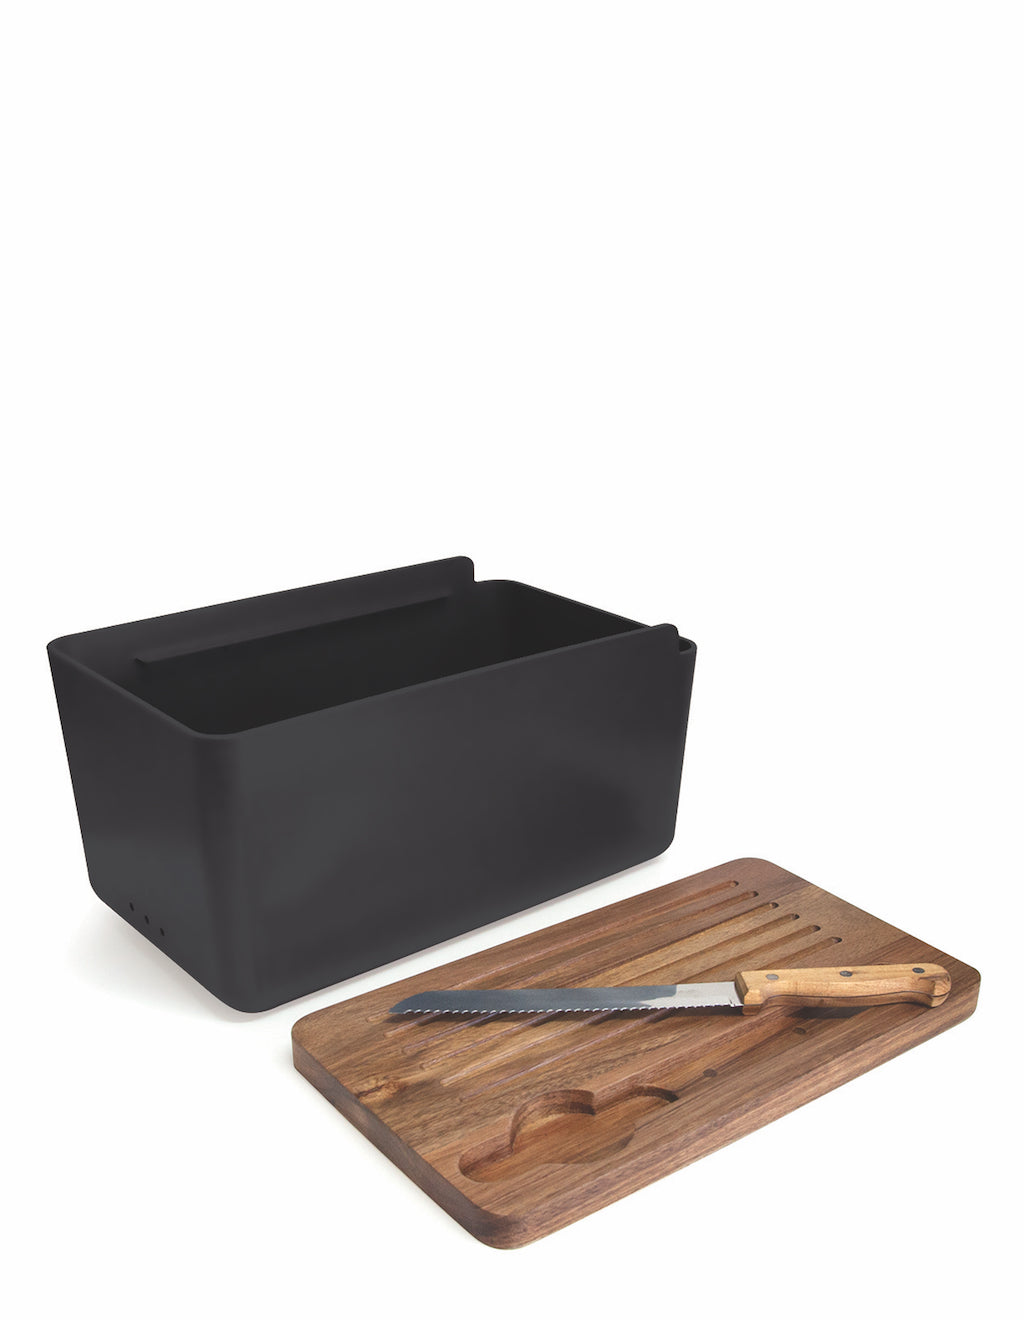 Salt&amp;Pepper&#39;s HUDSON Bread Bin with Wooden Cutting Board is the result of a beautiful combination of acacia wood and a sleek black stainless steel base - Includes bread bin, chopping board and bread knife | Shop online or in-store | AfterPay available | Australia wide Shipping | Unit 8, 259 Princes Hwy Ulladulla | South Coast NSW | 0427795959, 44541523